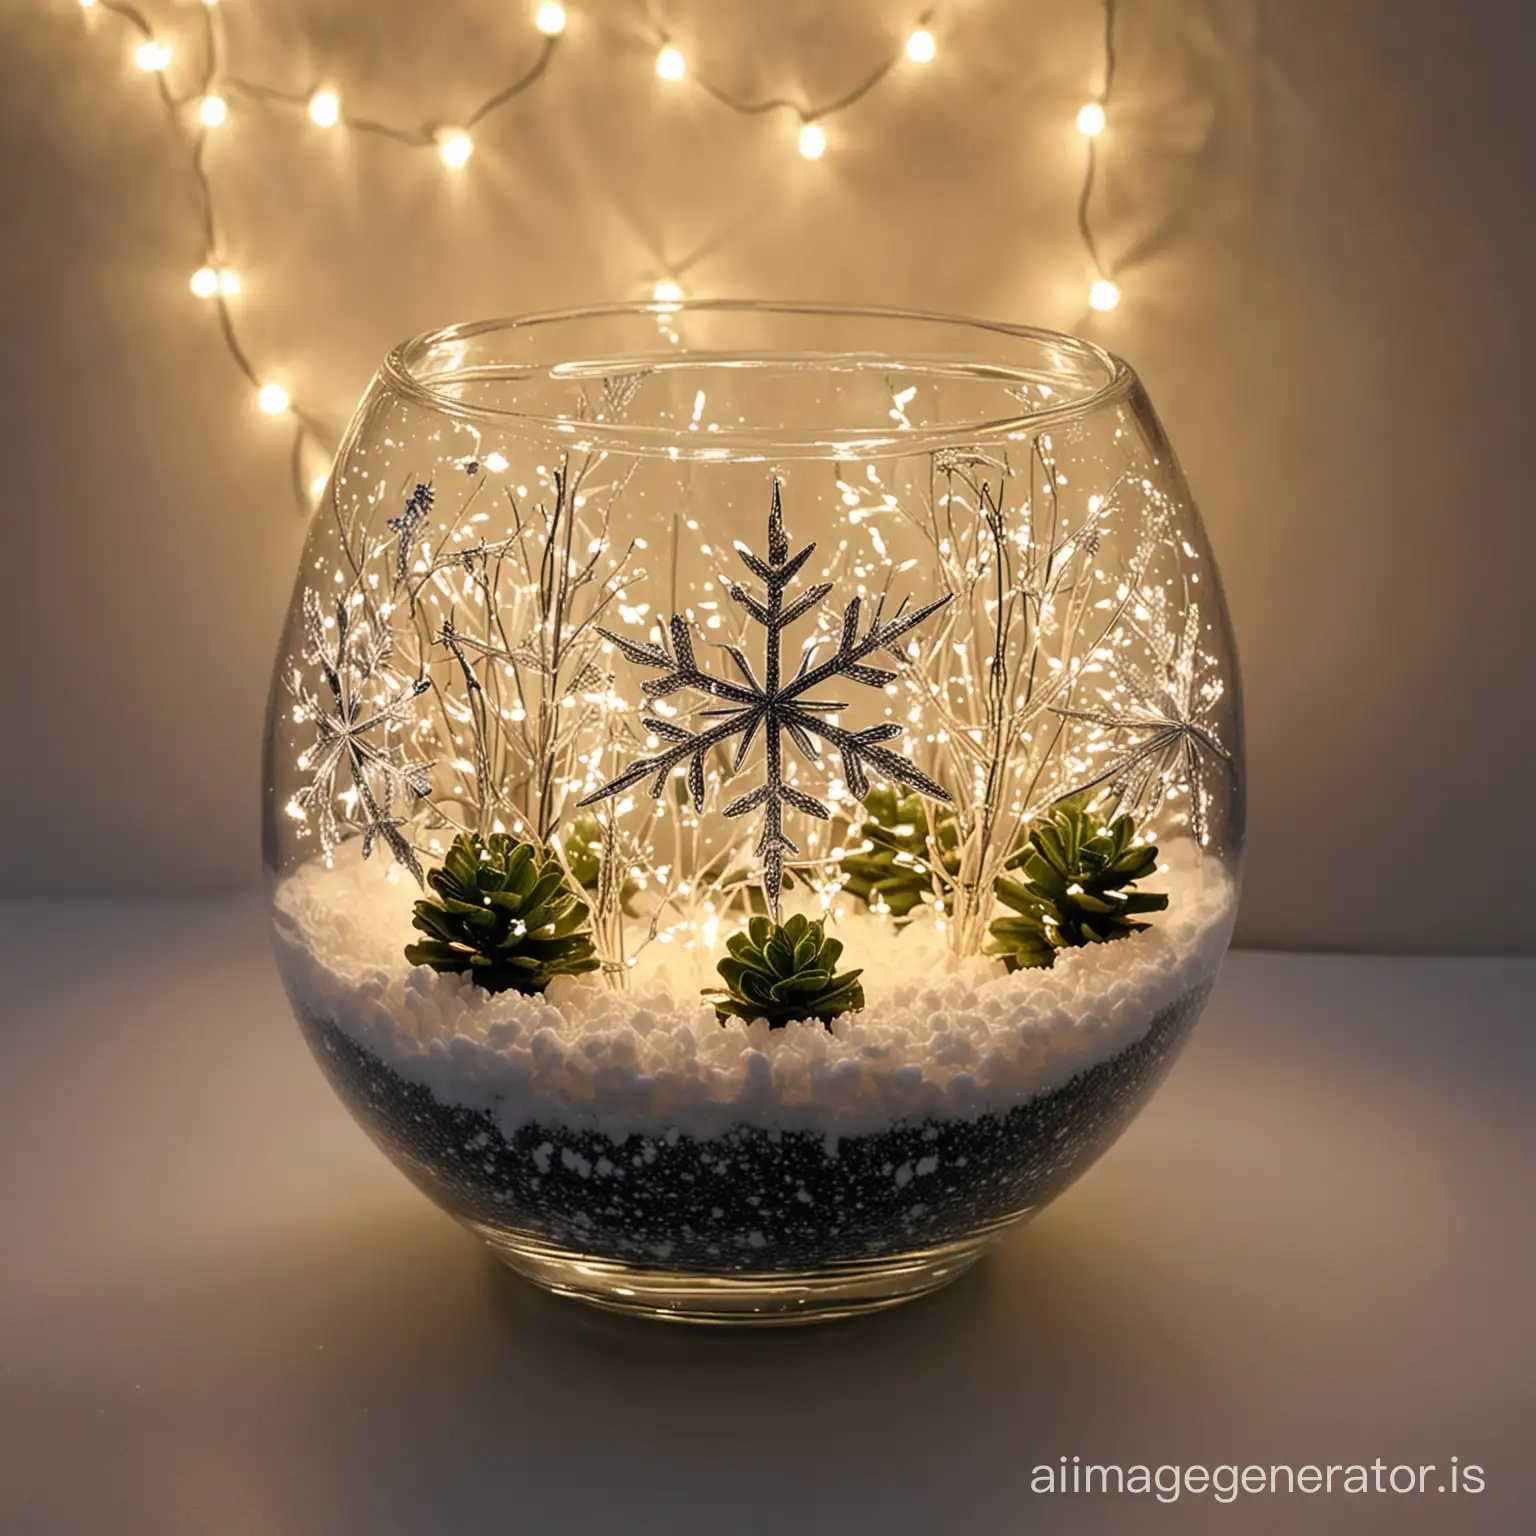 Decorative-Glass-Vase-with-Snow-and-Origami-Snowflake-under-Fairy-Lights